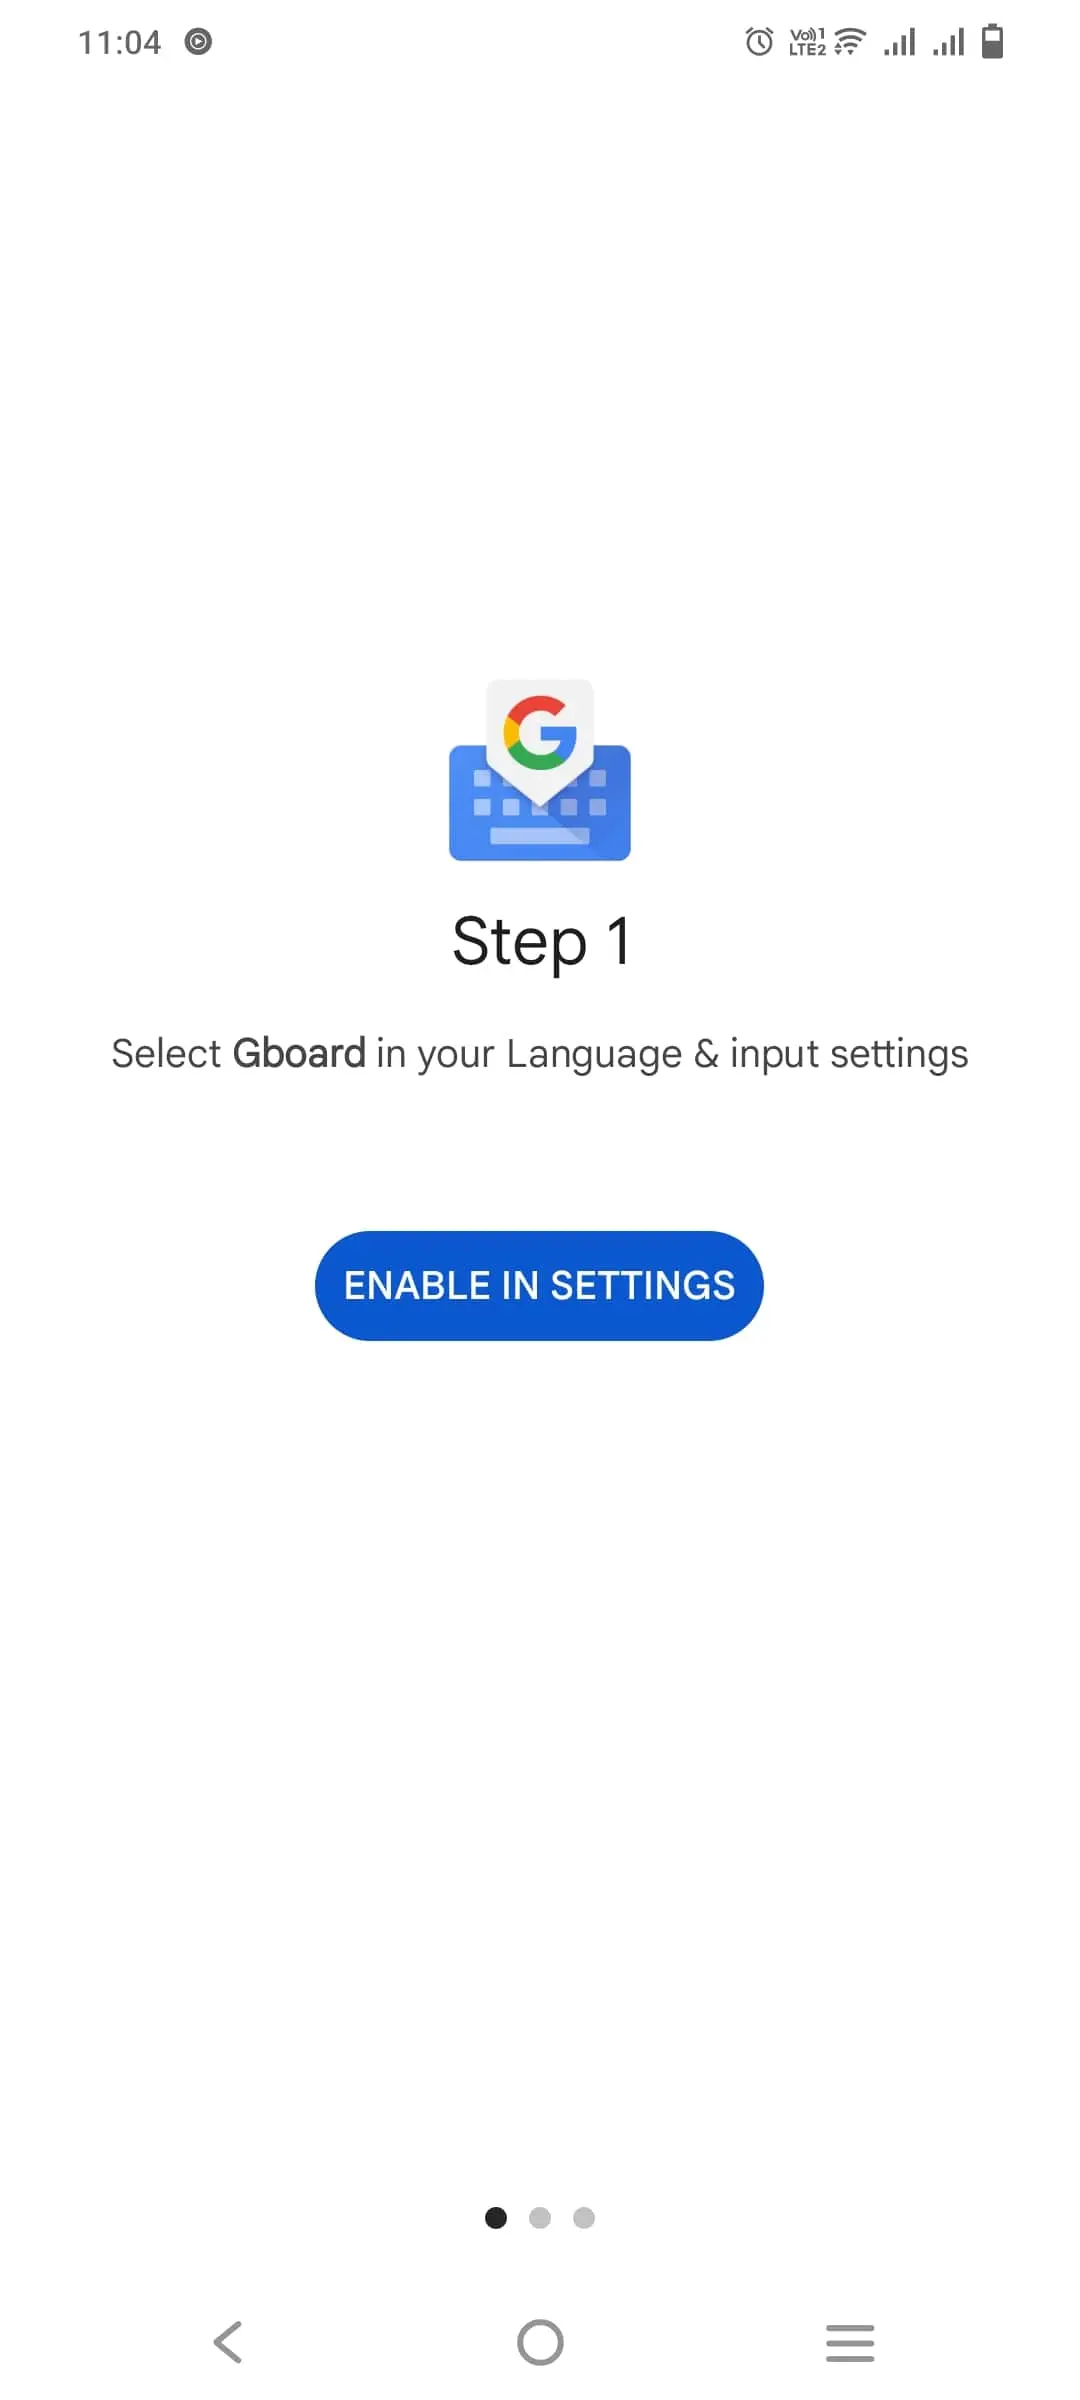 Install Gboard in Mobile phones